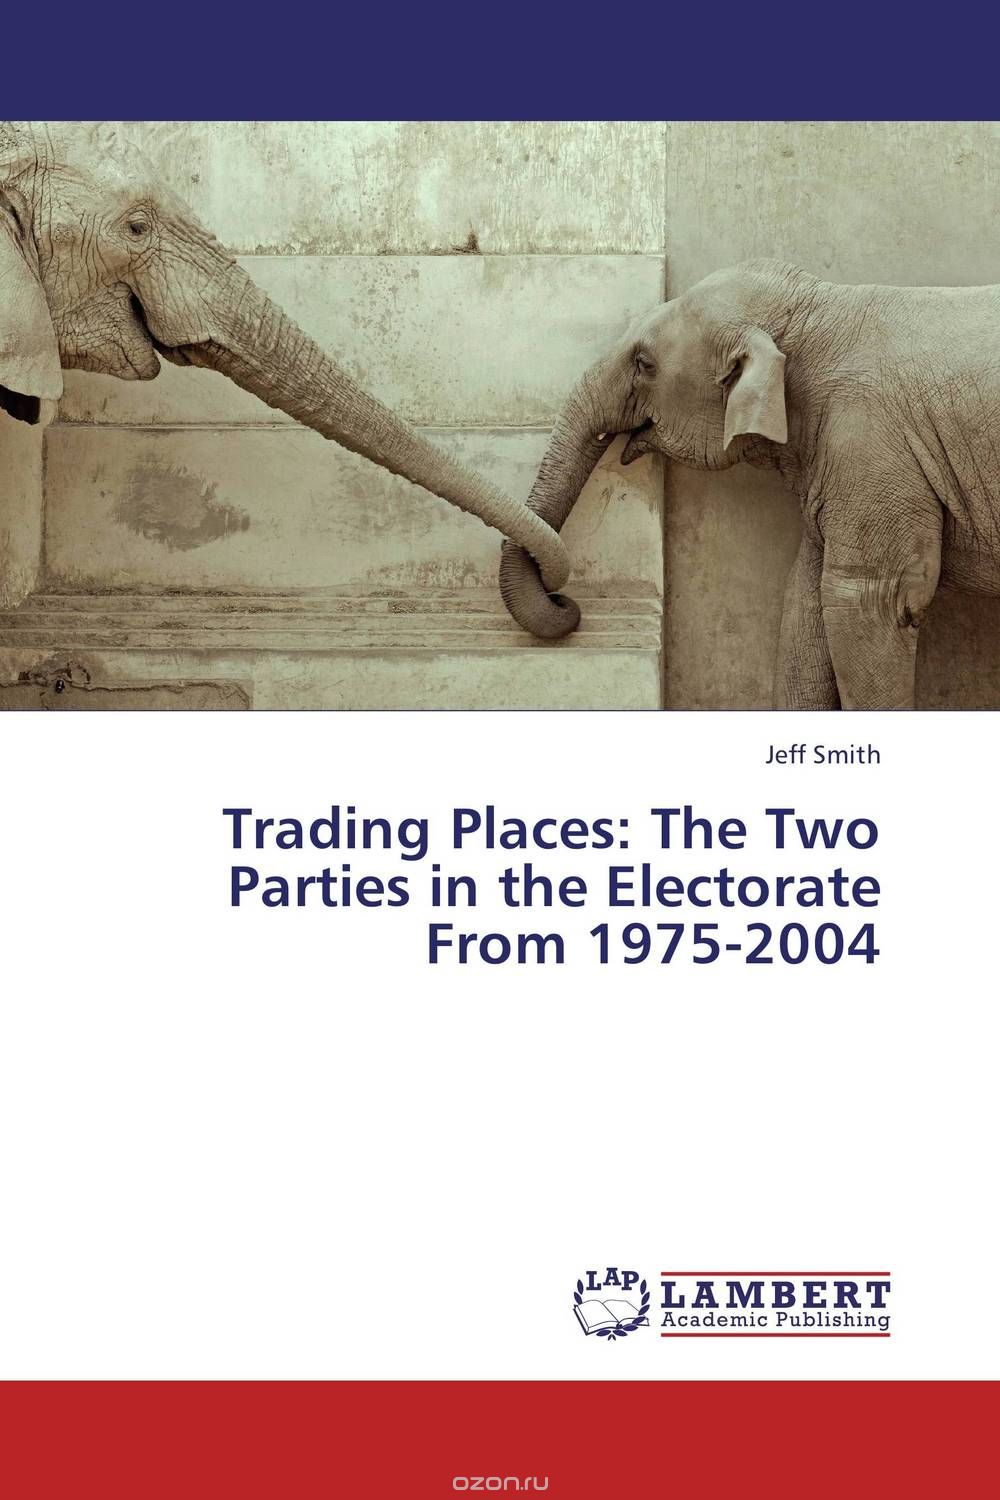 Скачать книгу "Trading Places: The Two Parties in the Electorate From 1975-2004"